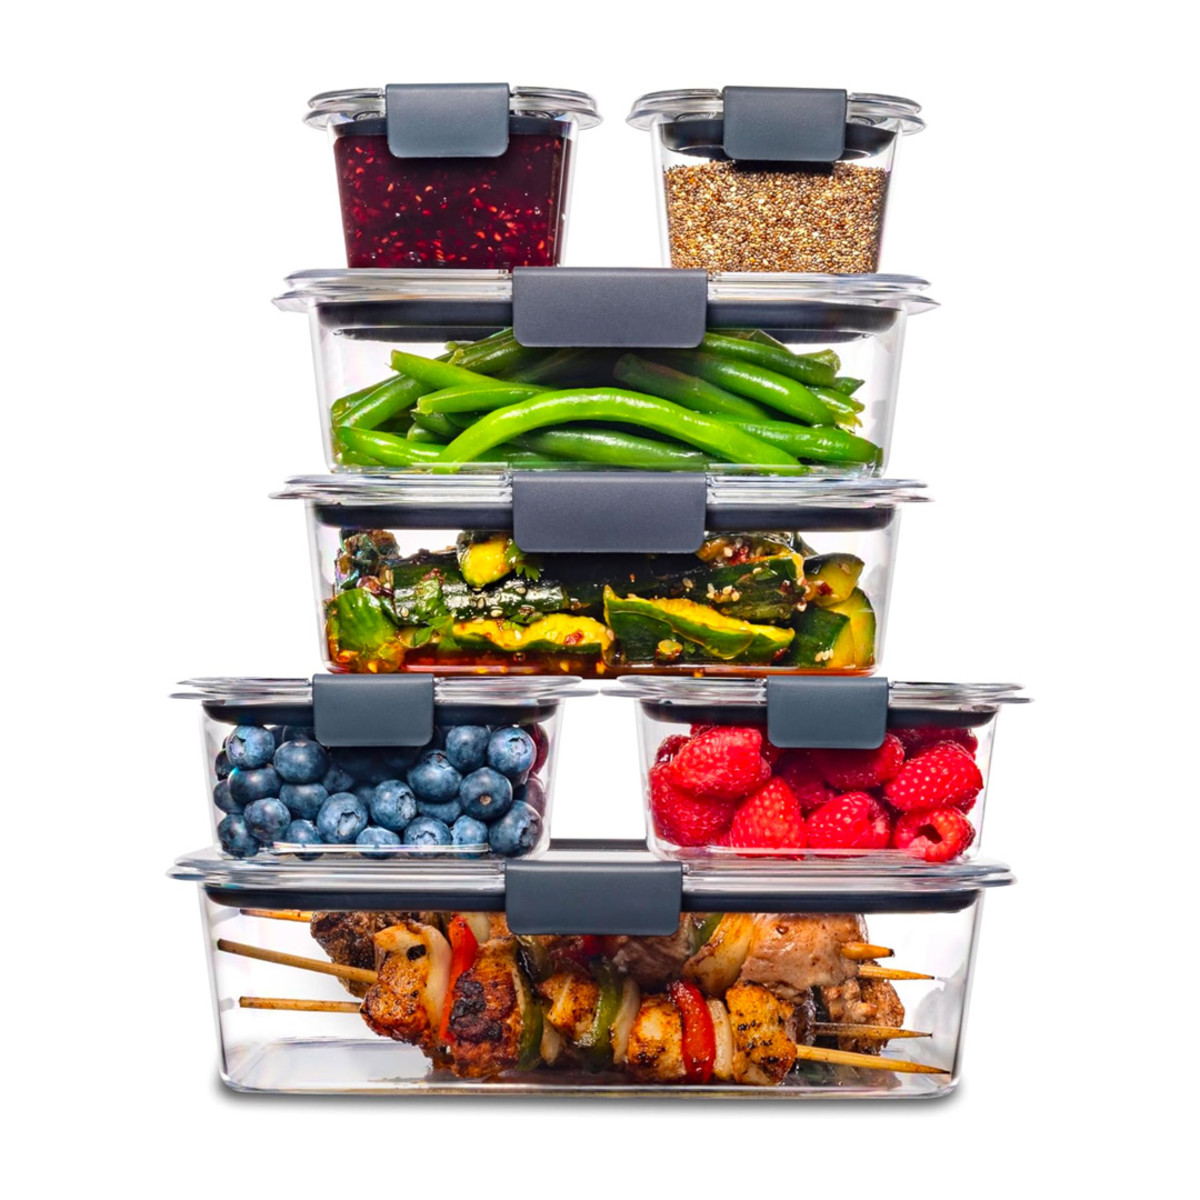 https://www.thestreet.com/.image/t_share/MjAyNzcwMTA0NDcwMzQ4ODEy/rubbermaid-brilliance-food-storage-containers-14-piece-set.jpg